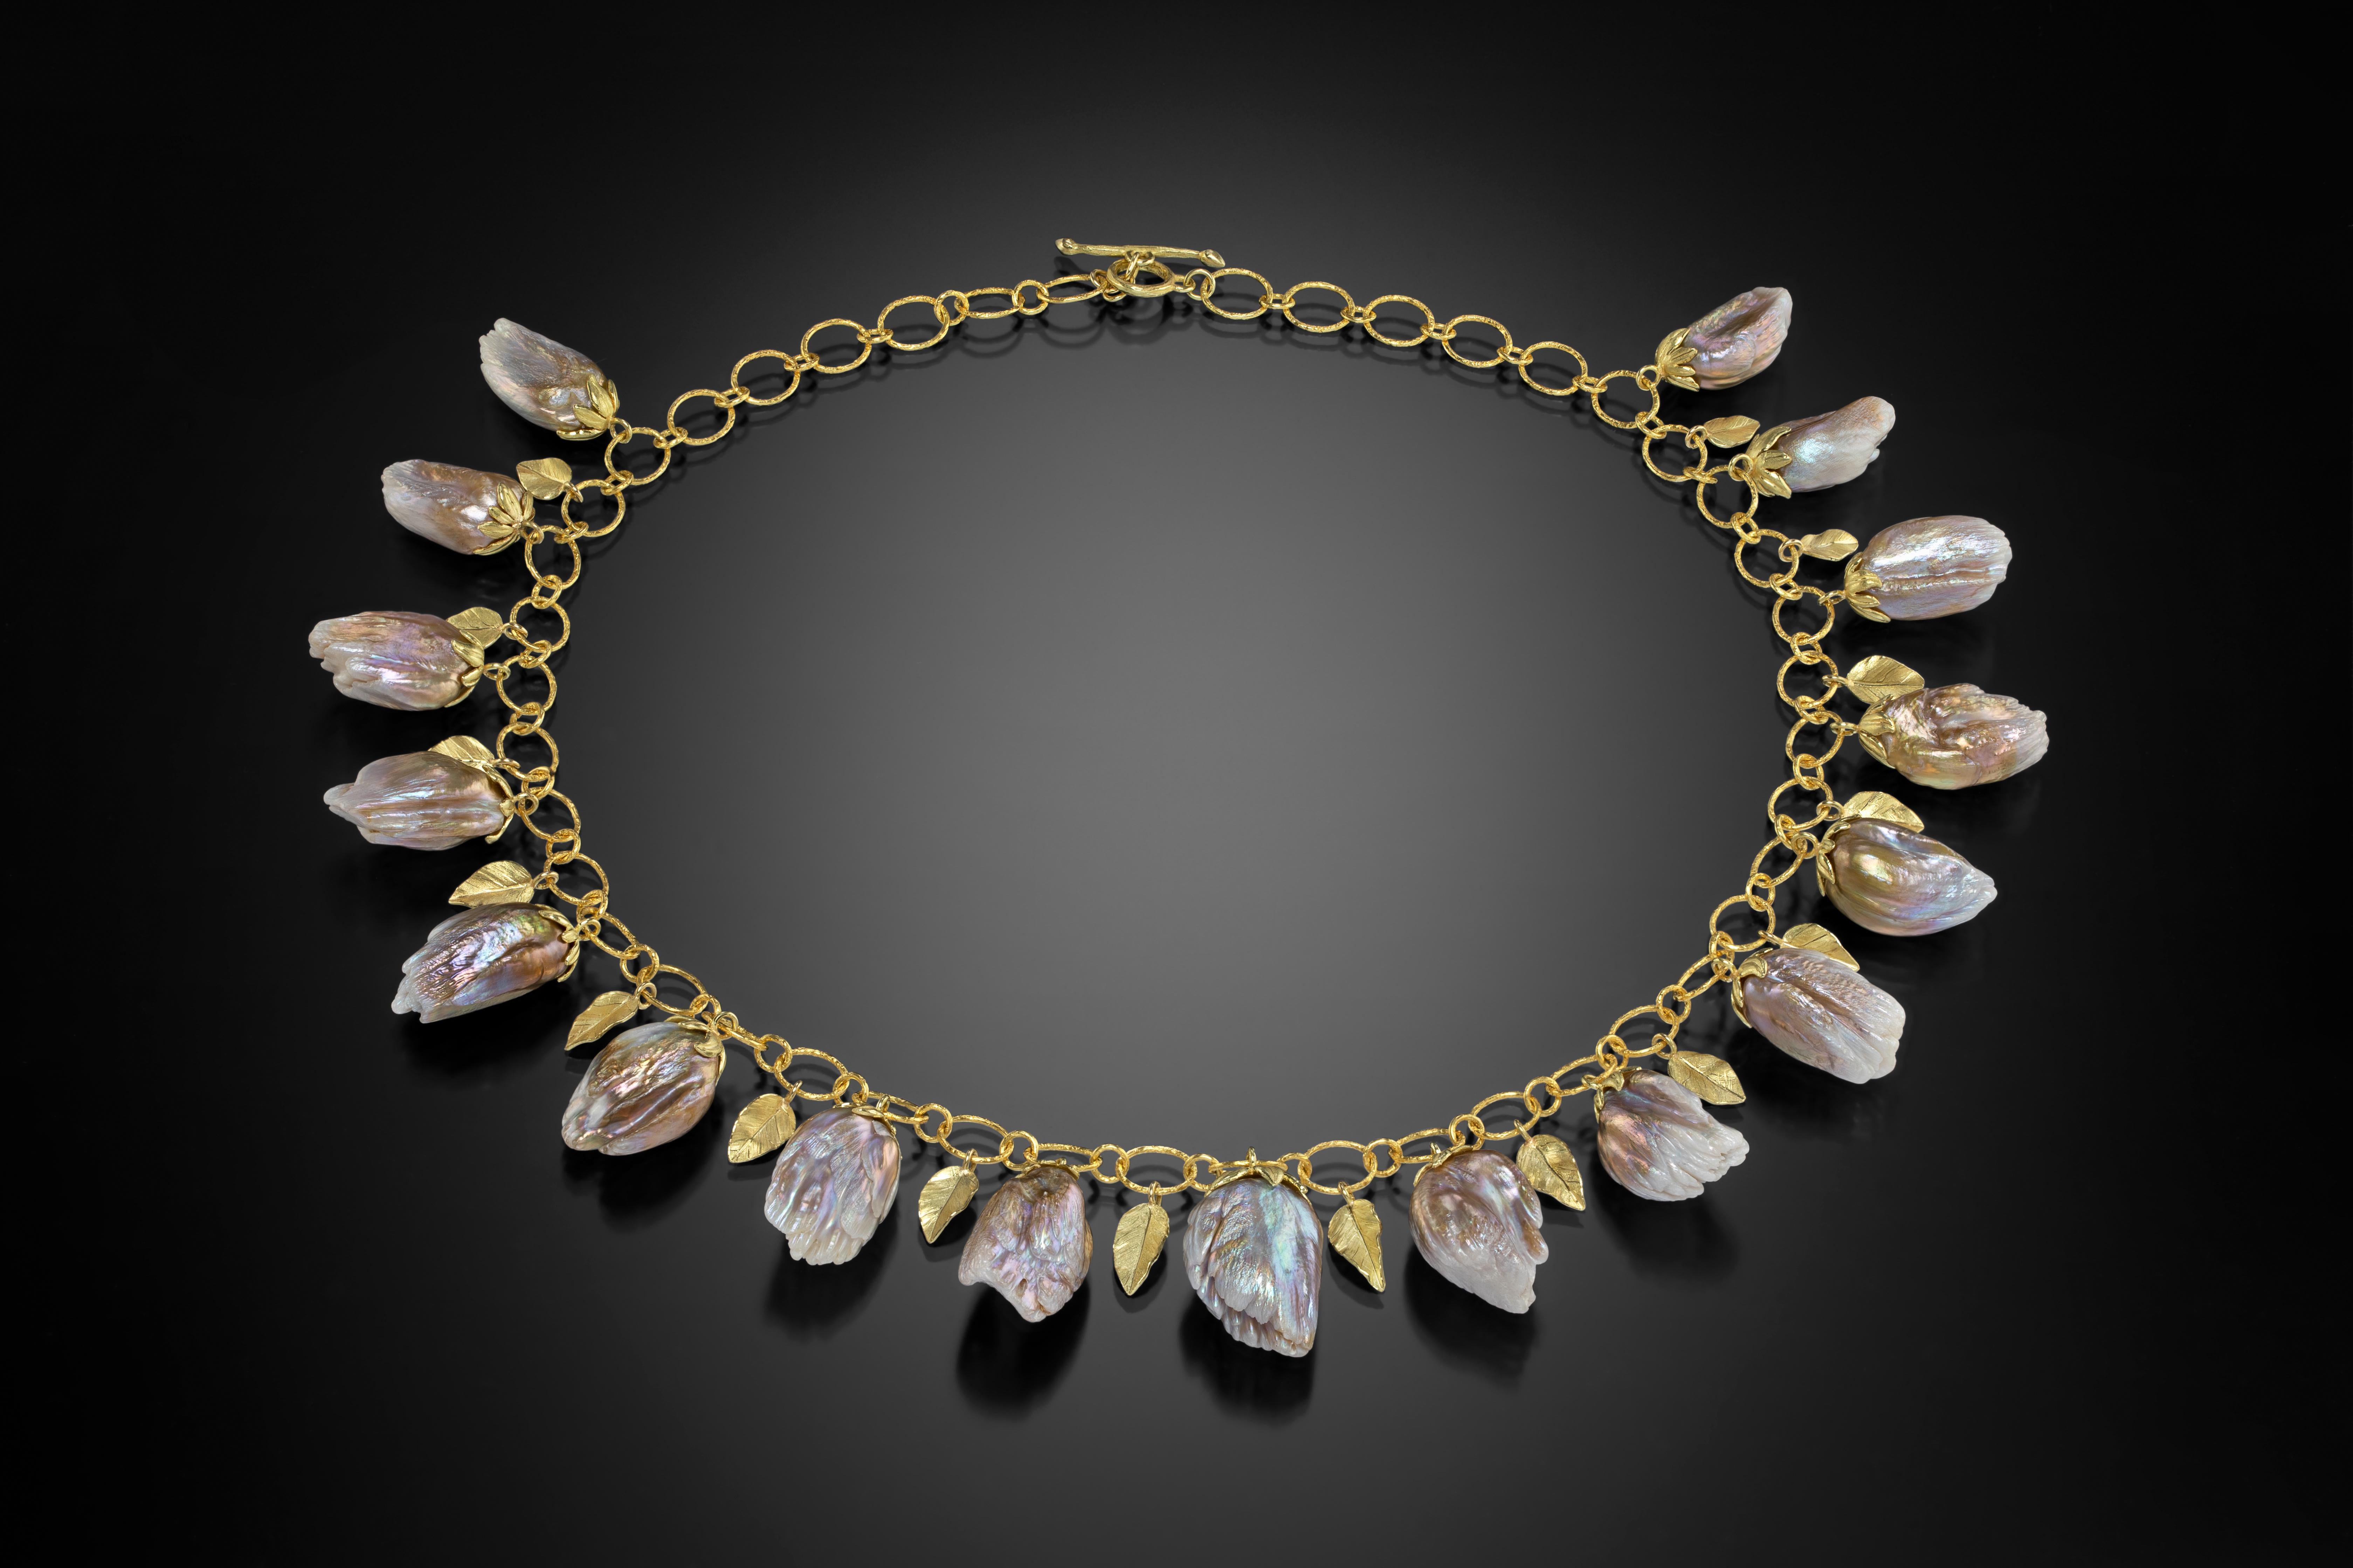 One-of-a-Kind Necklace handcrafted in exquisitely detailed 18k yellow gold with very rare, high-luster, strong-orient, metallic pink feather pearls. Each phenomenal pearl is capped in a handmade 18k gold petal top, and separated individually by